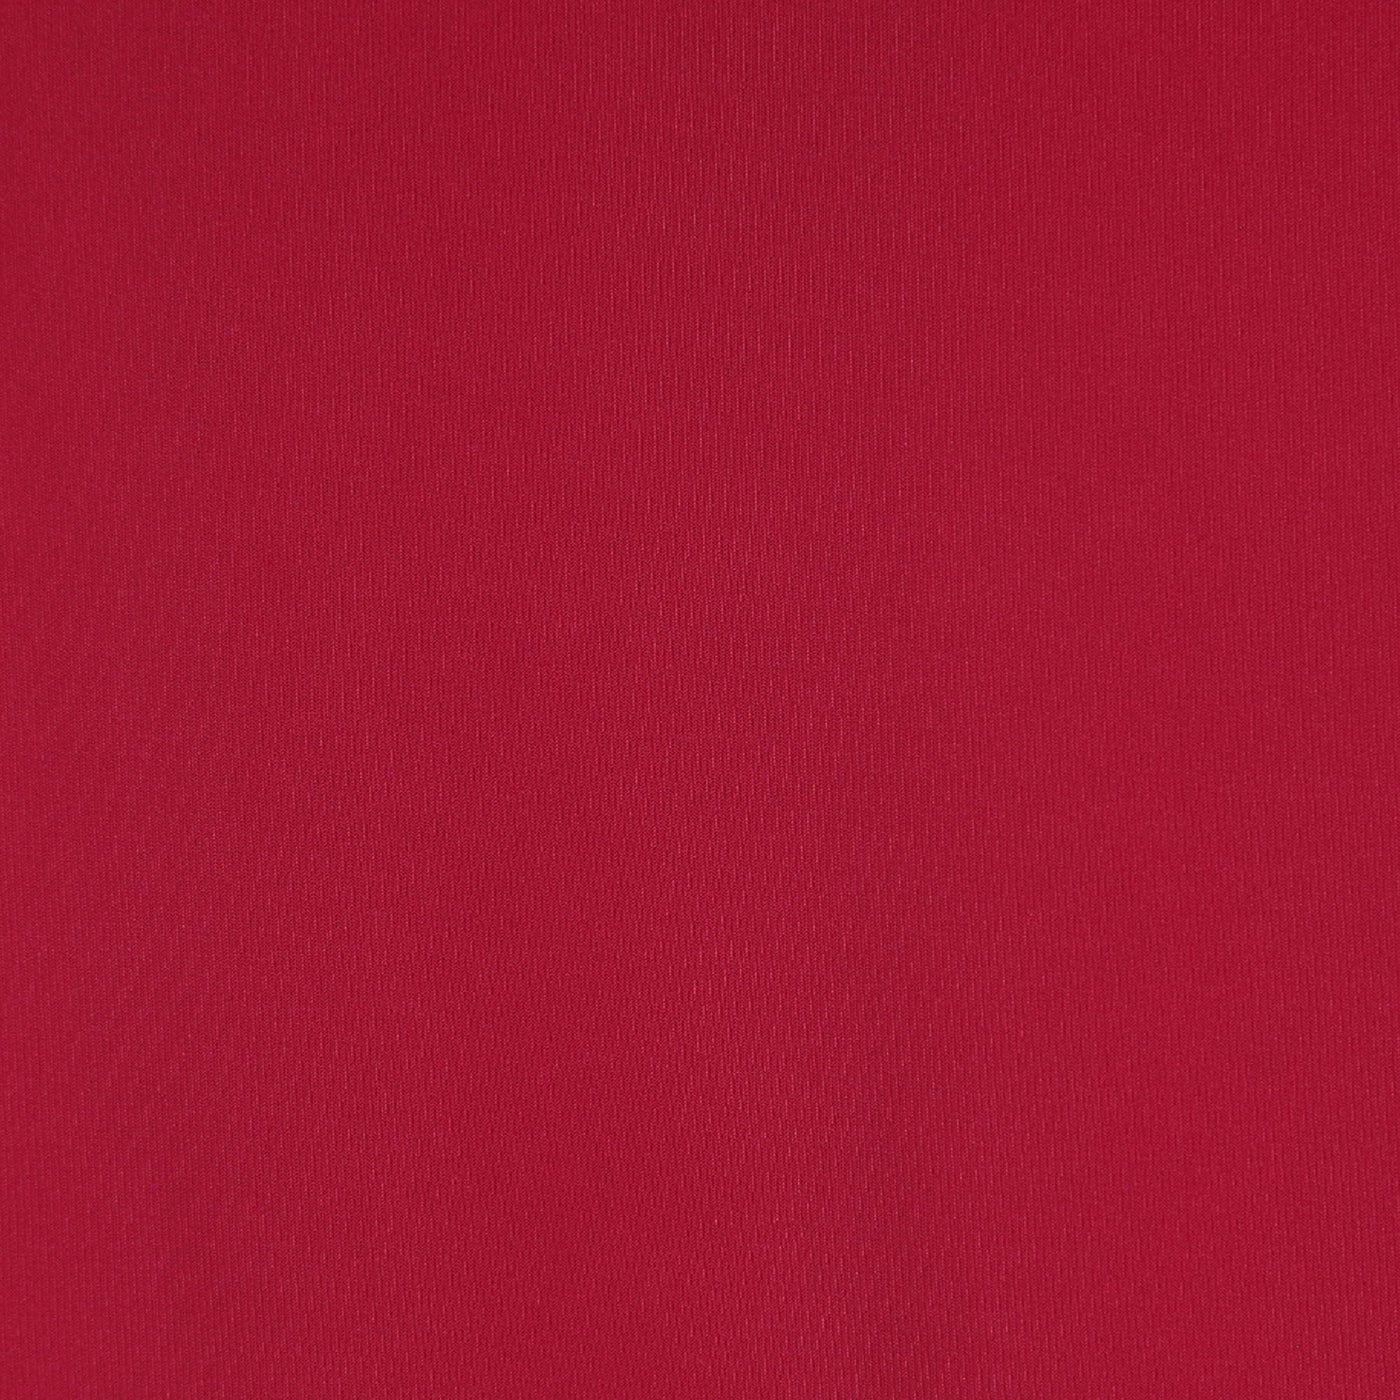 ITY Polyester Spandex Fabric | Red - FabricLA.com